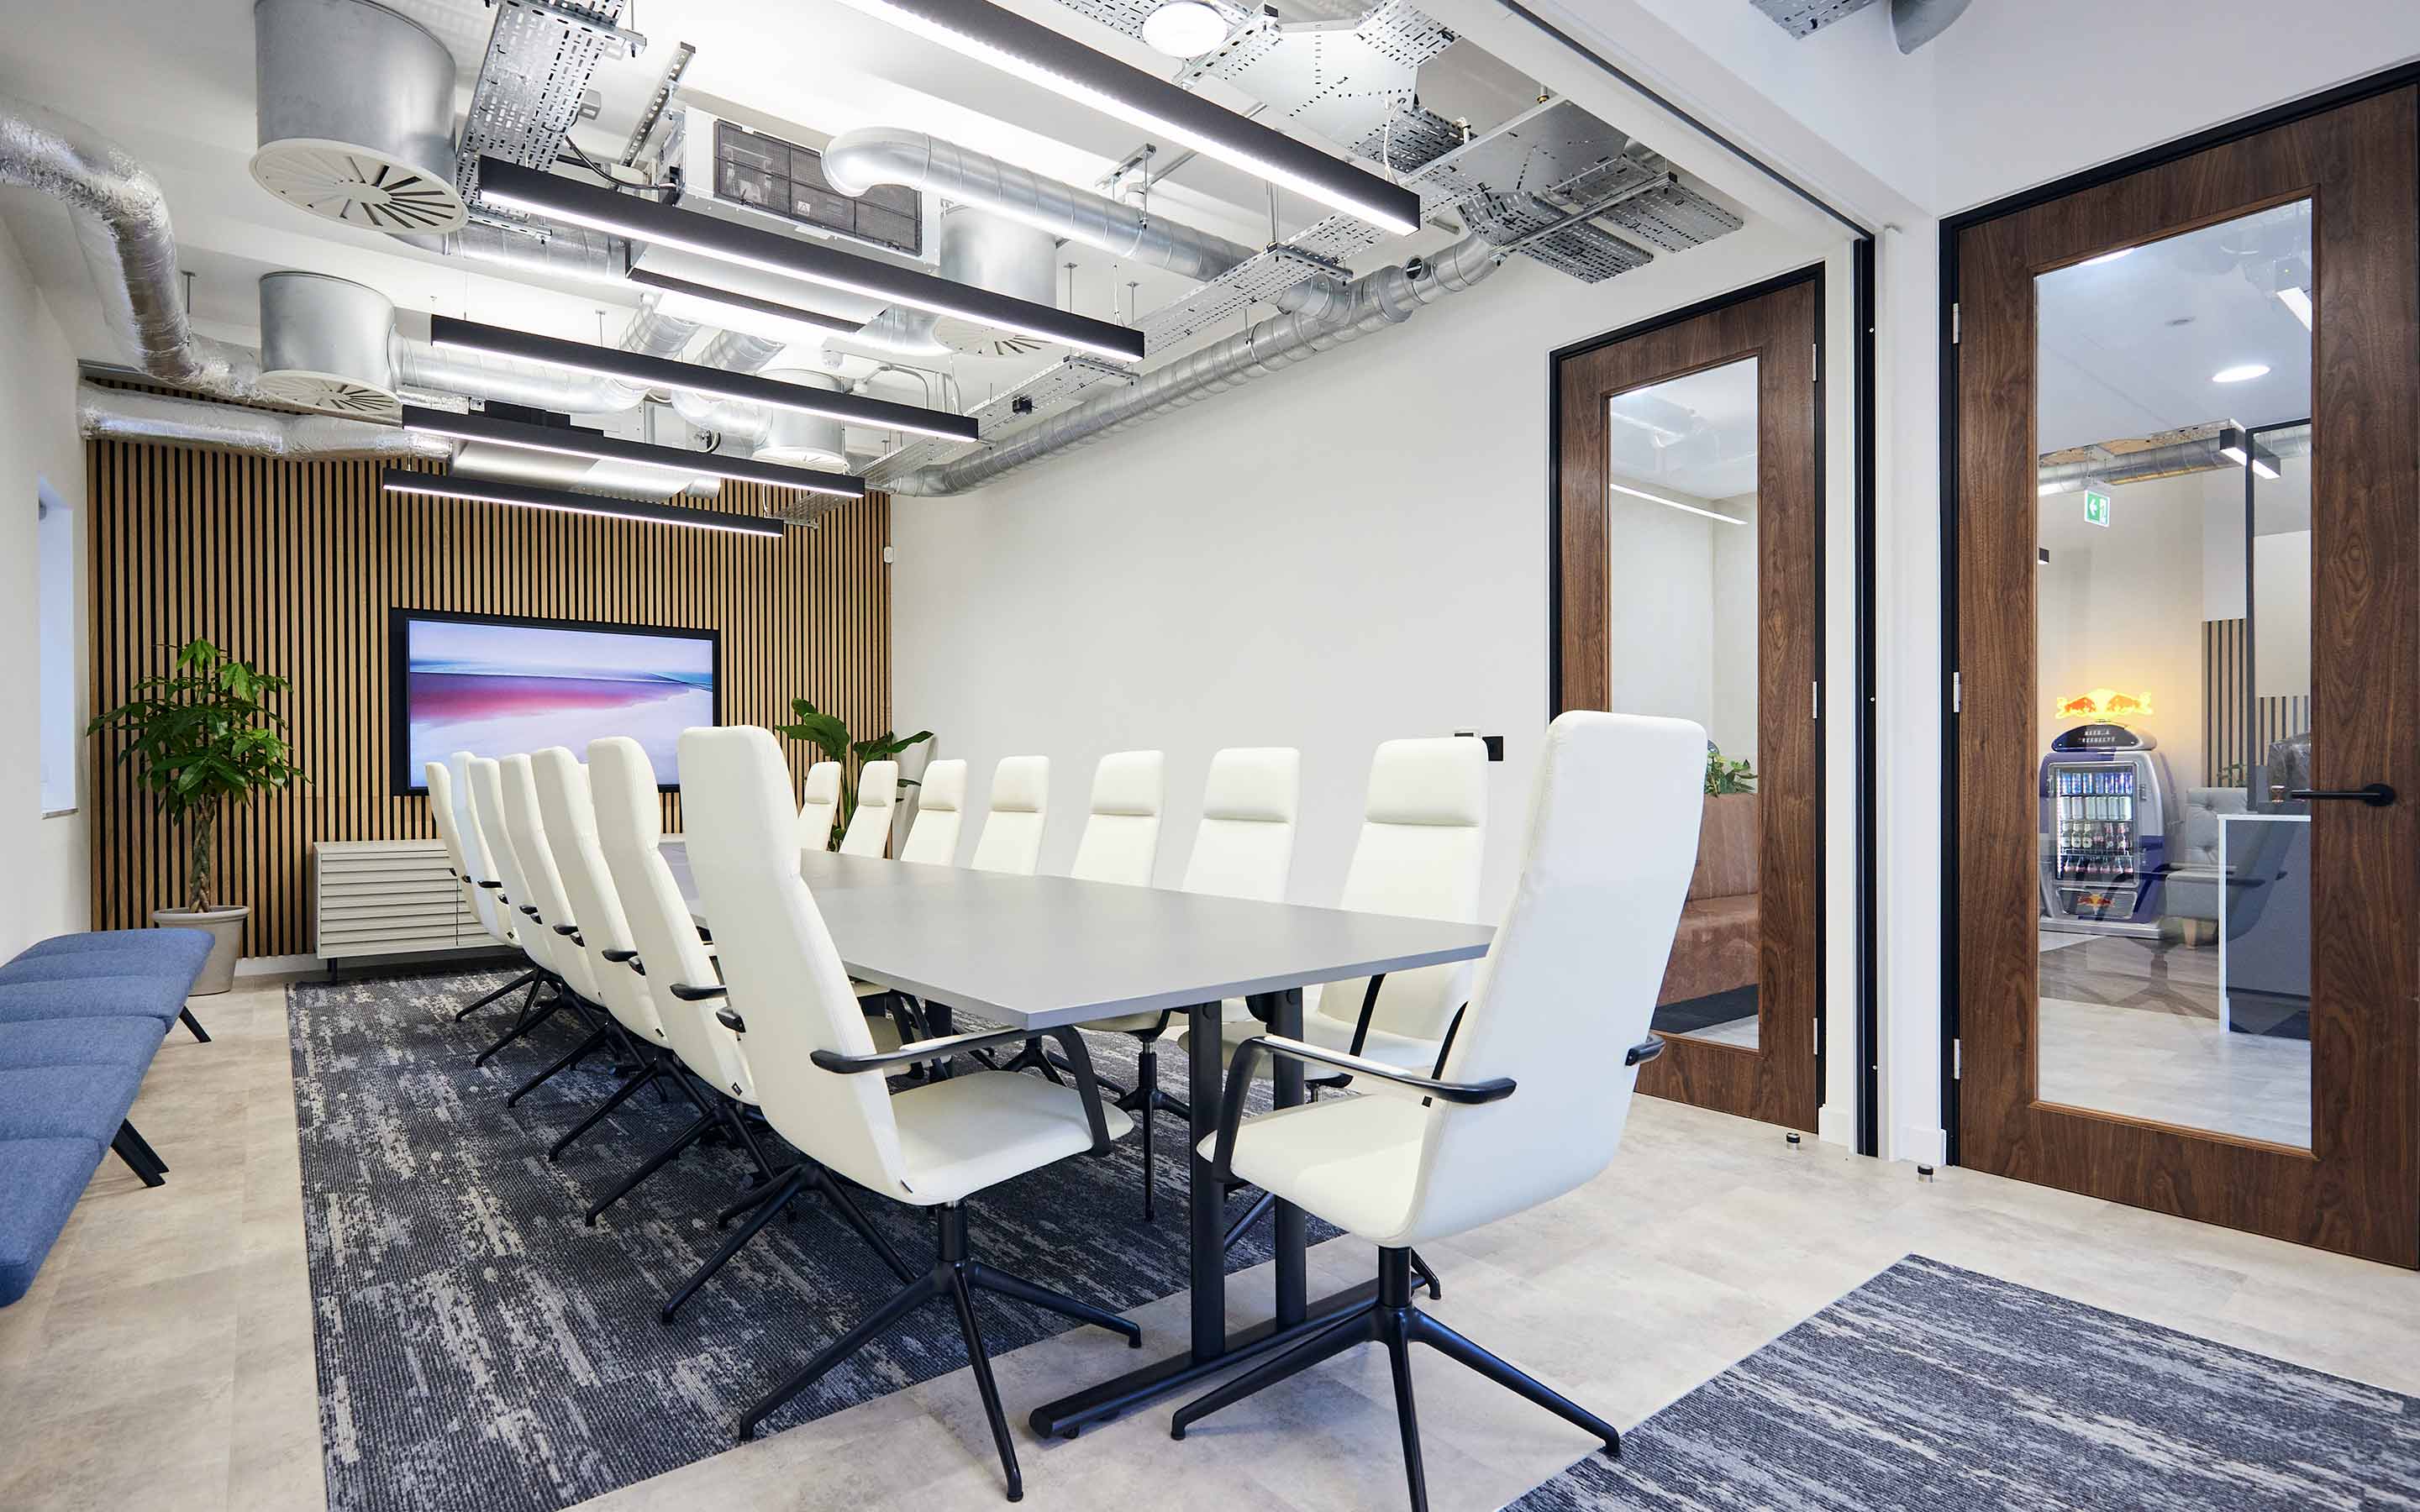 Chic office interior design showcasing elegant decor, ergonomic furniture, and a cozy ambiance in a professional meeting room